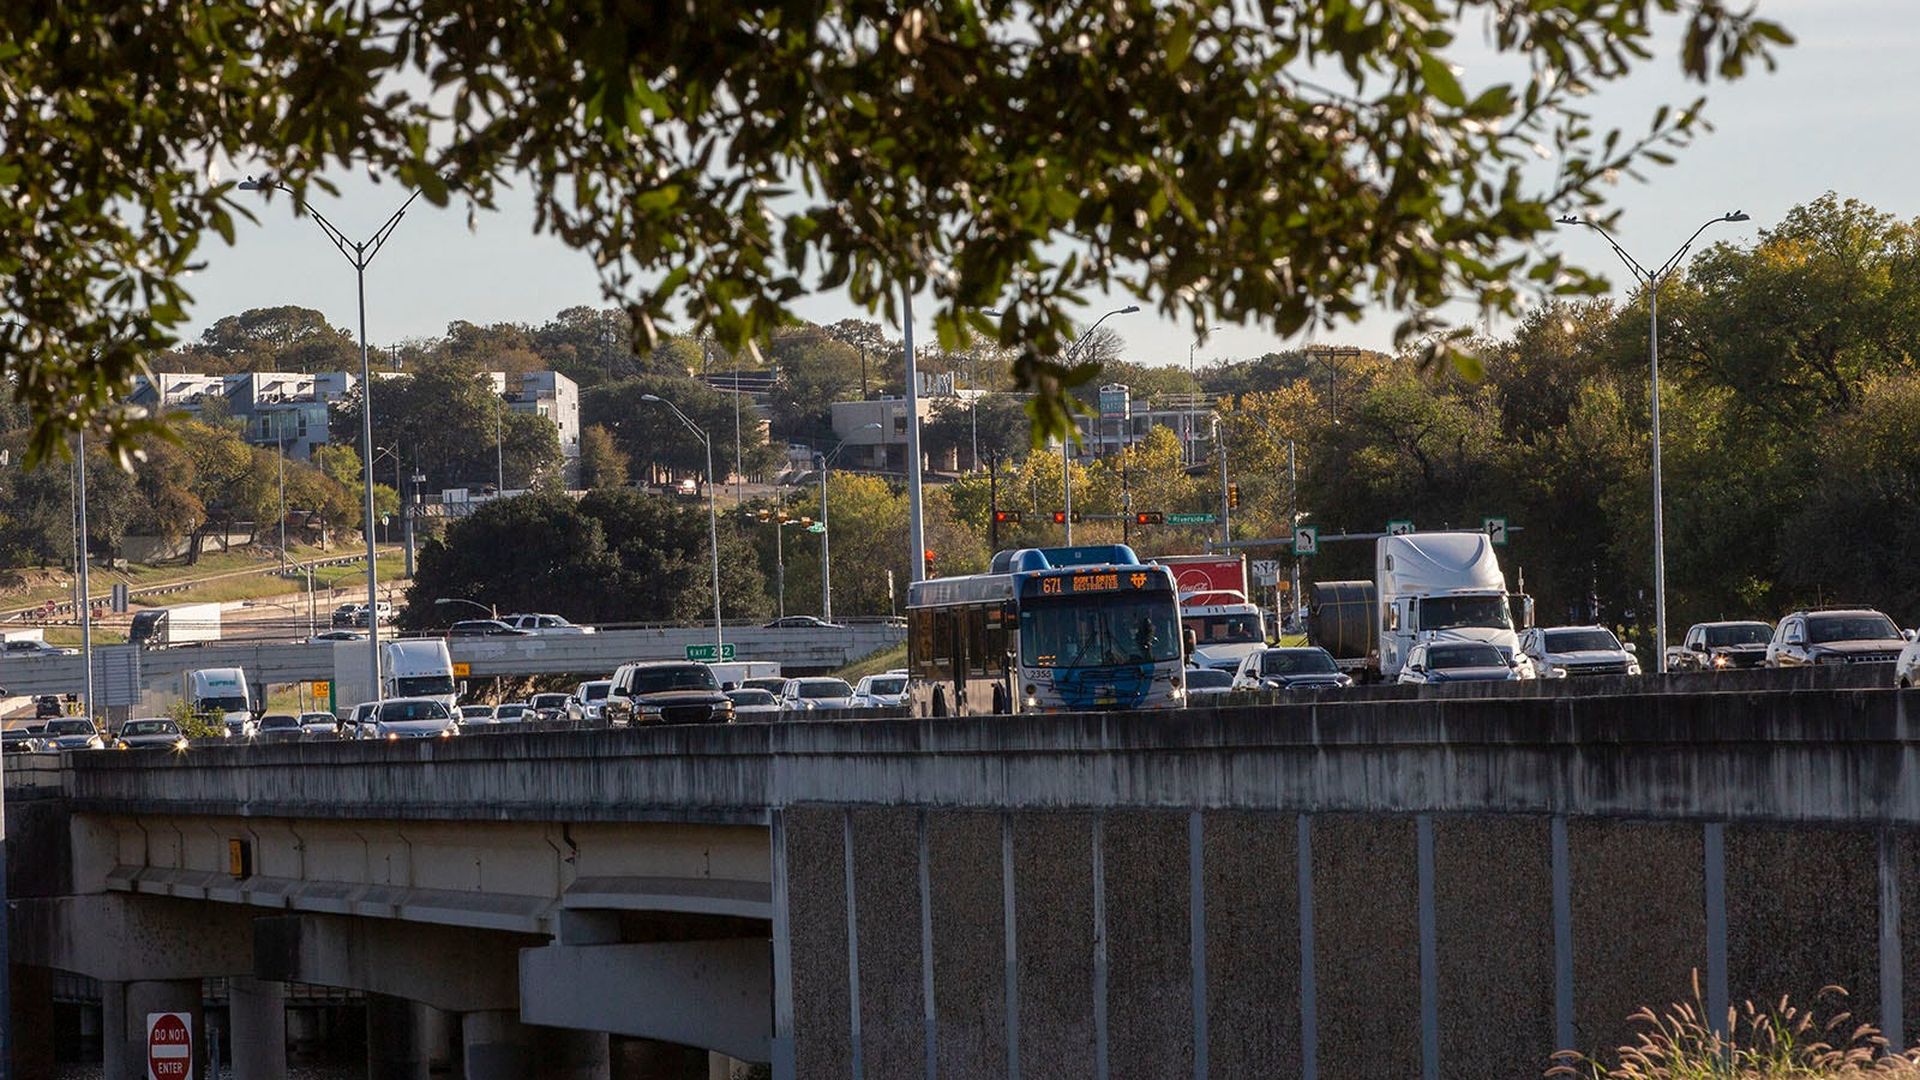 Traffic on I-35 in downtown Austin.